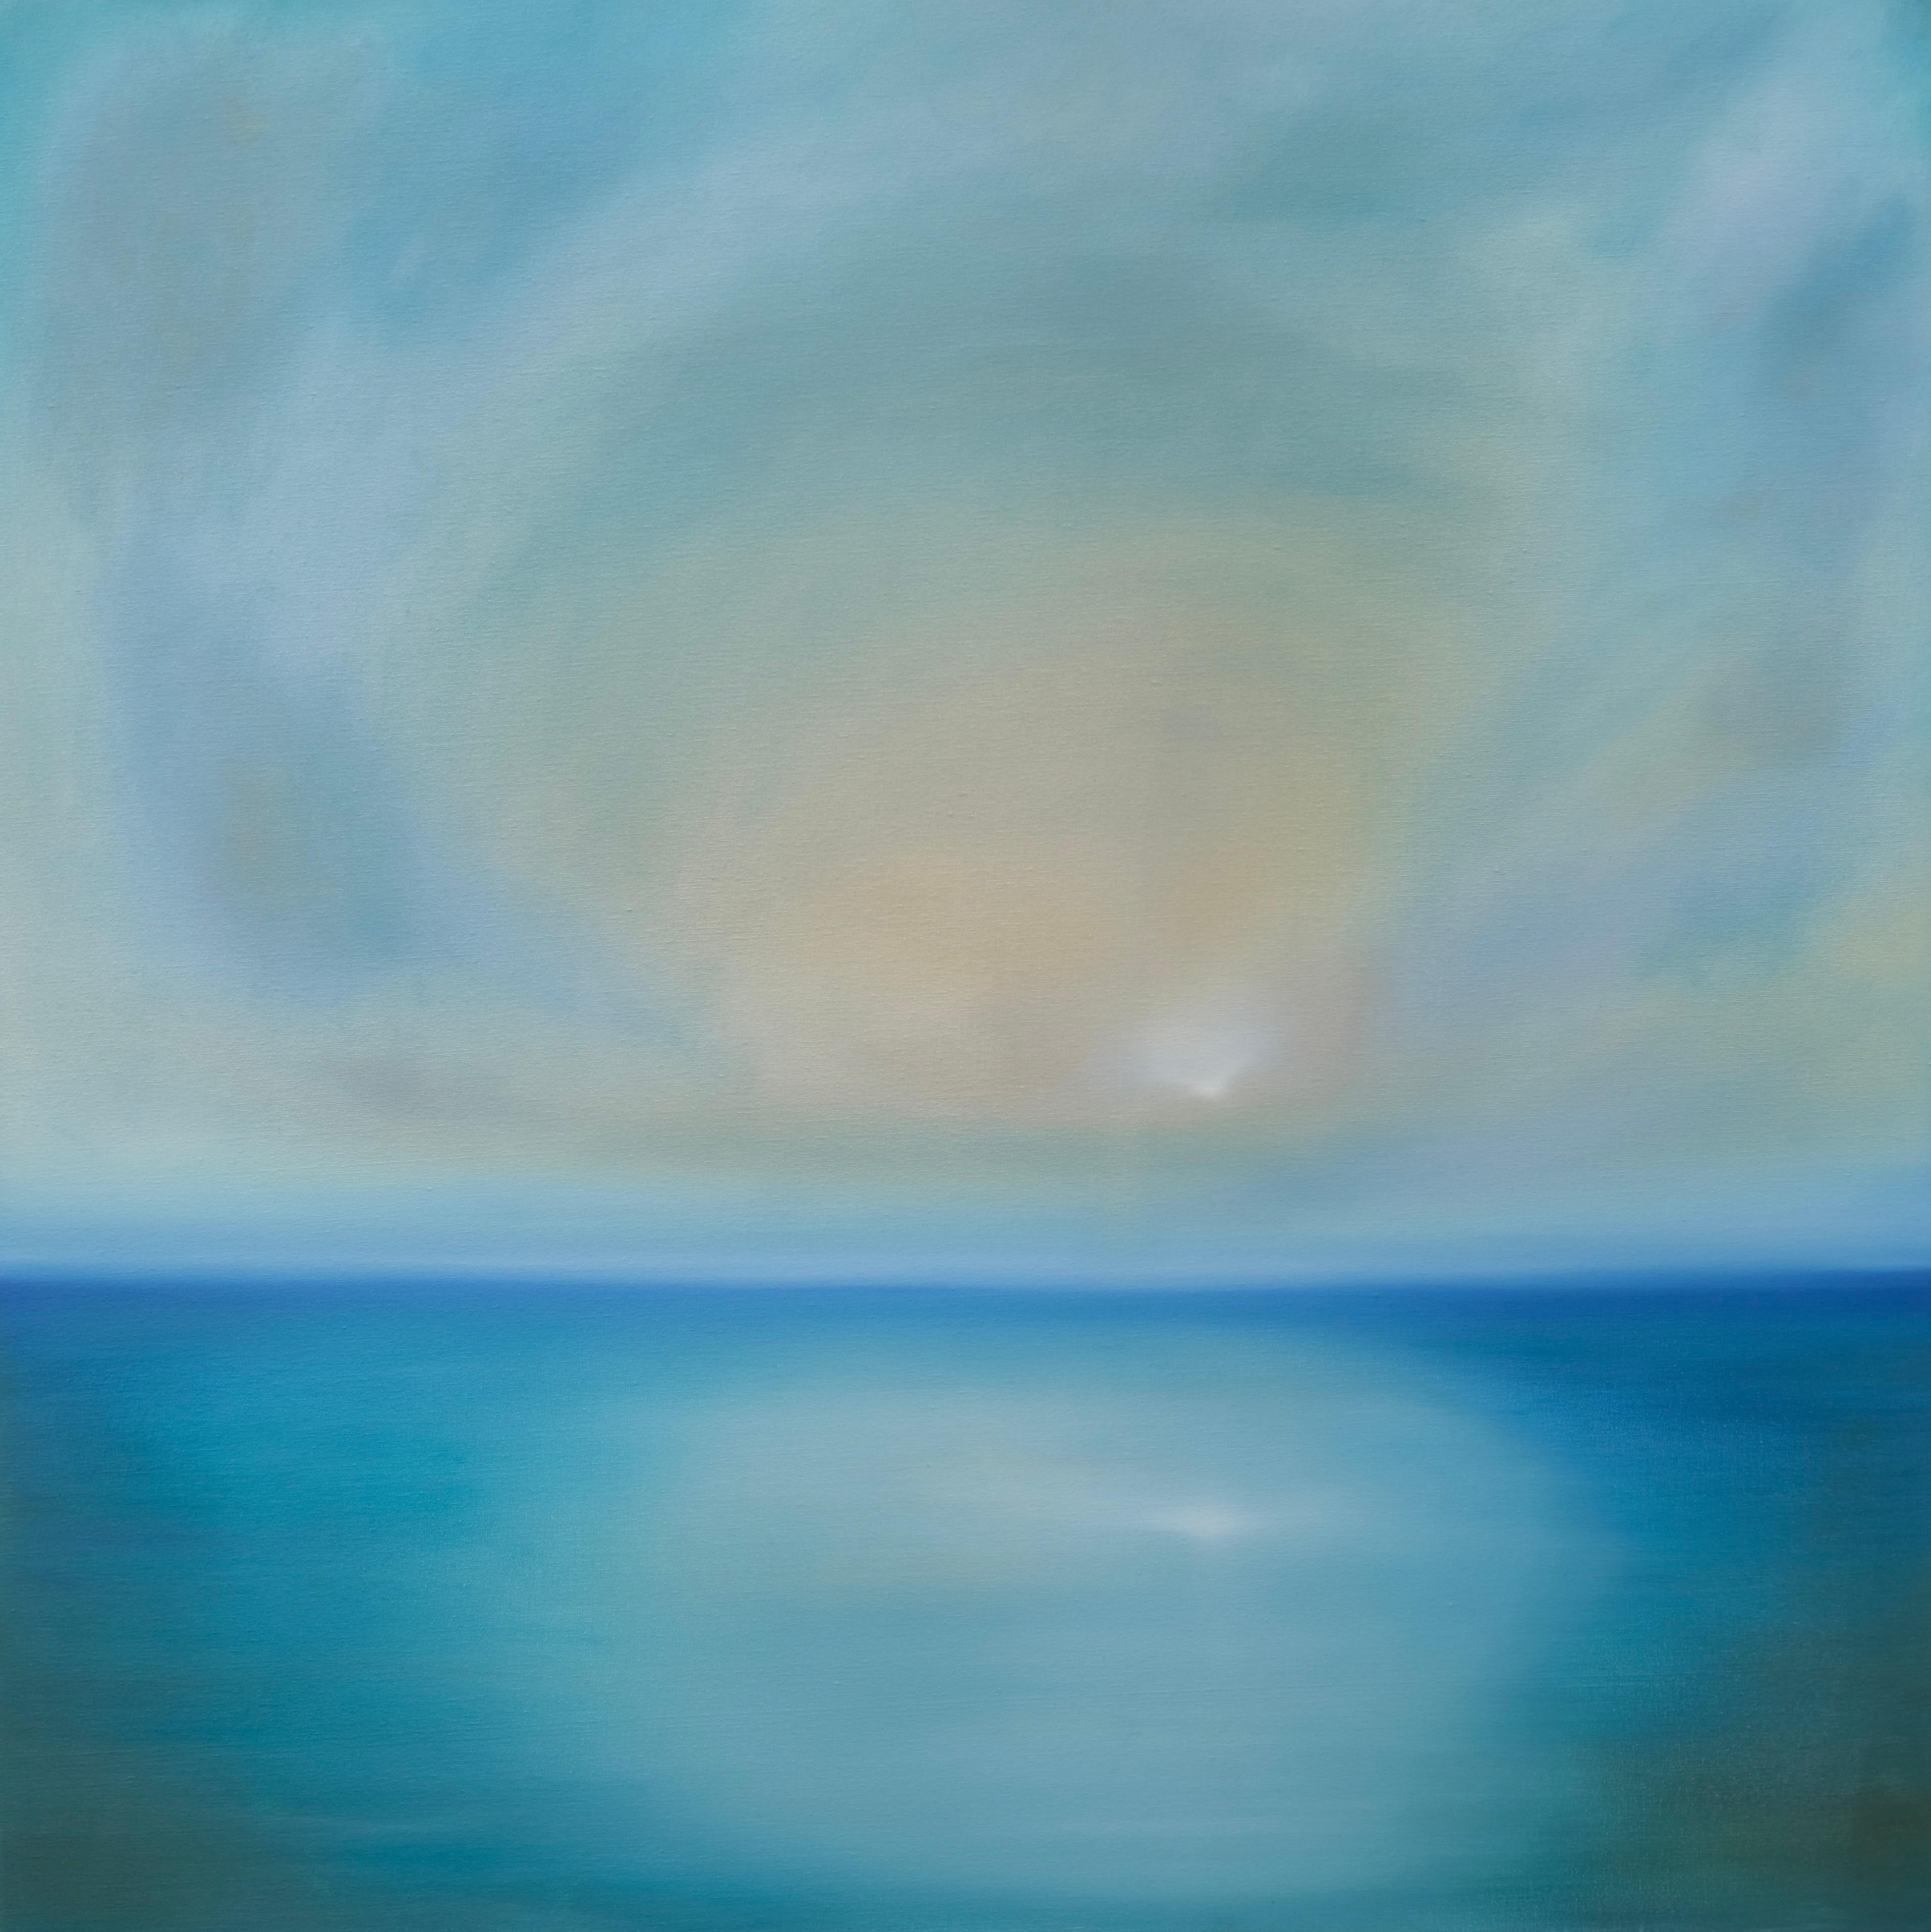 Jonathan Speed Landscape Painting - Calm Seas-original abstract seascape-ocean painting for sale-contemporary Art